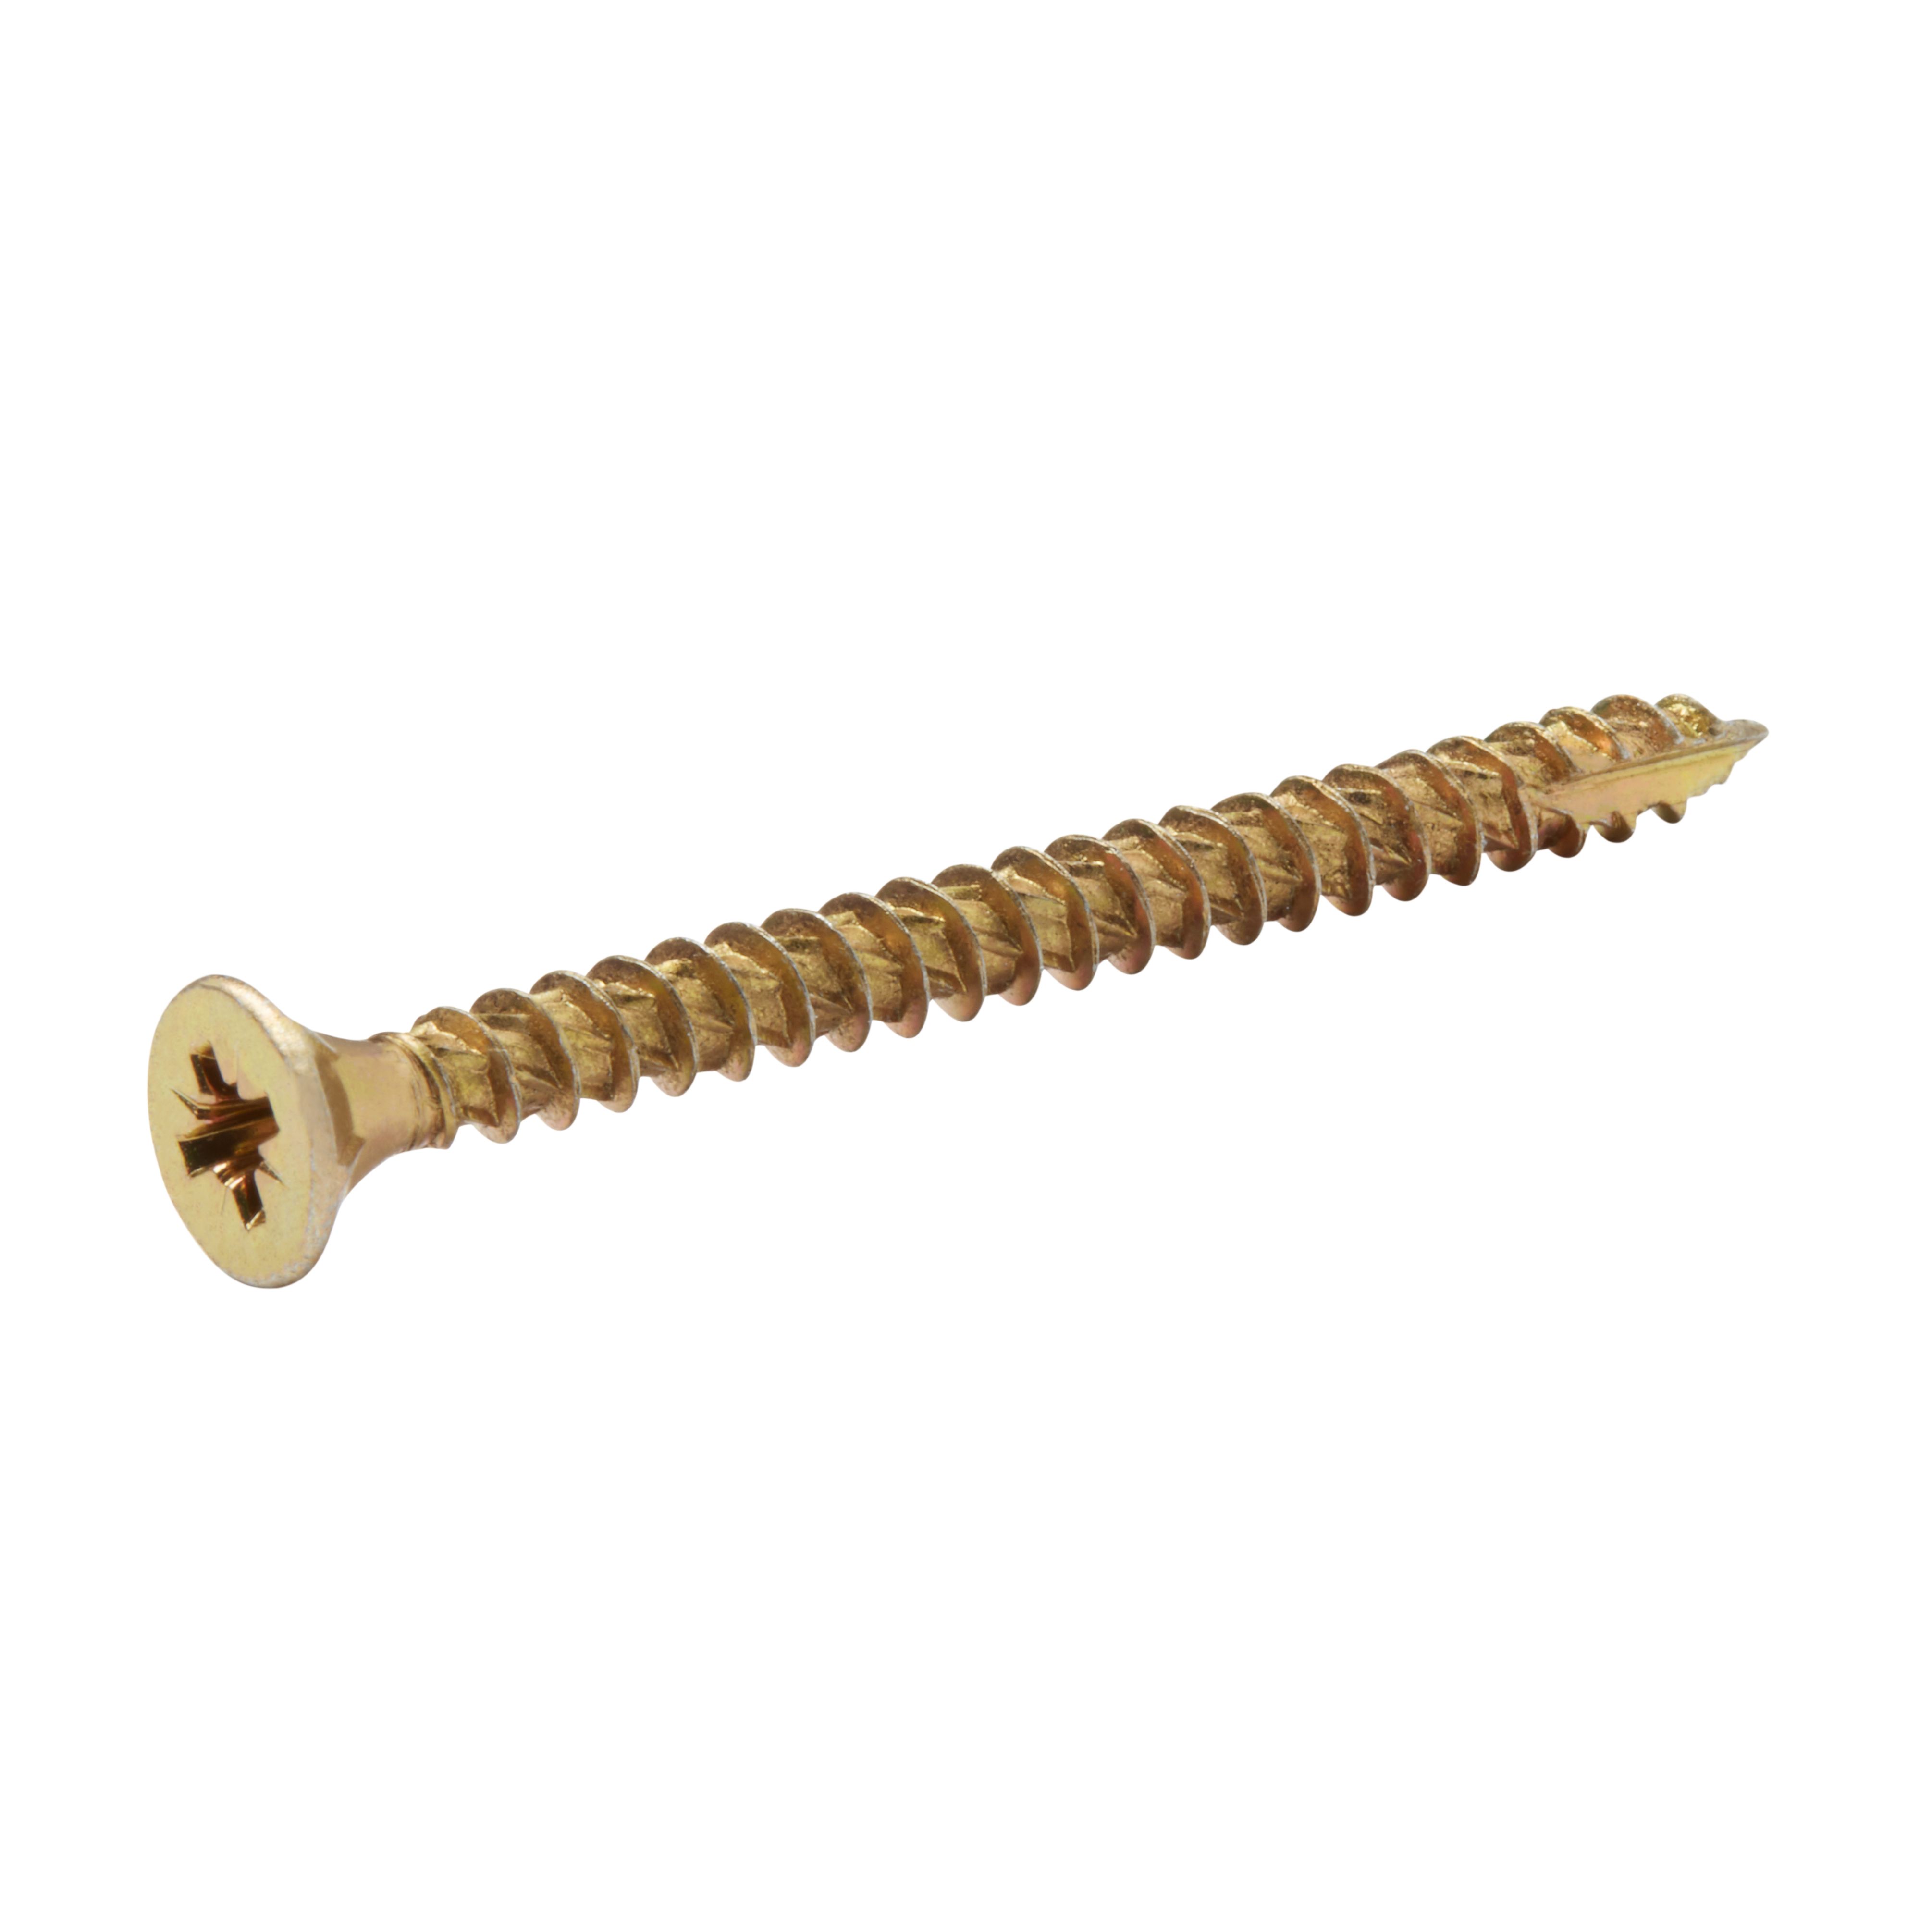 TurboDrive Assorted wood screw PZ Double-countersunk Yellow-passivated Carbon steel Screw, Pack of 1200